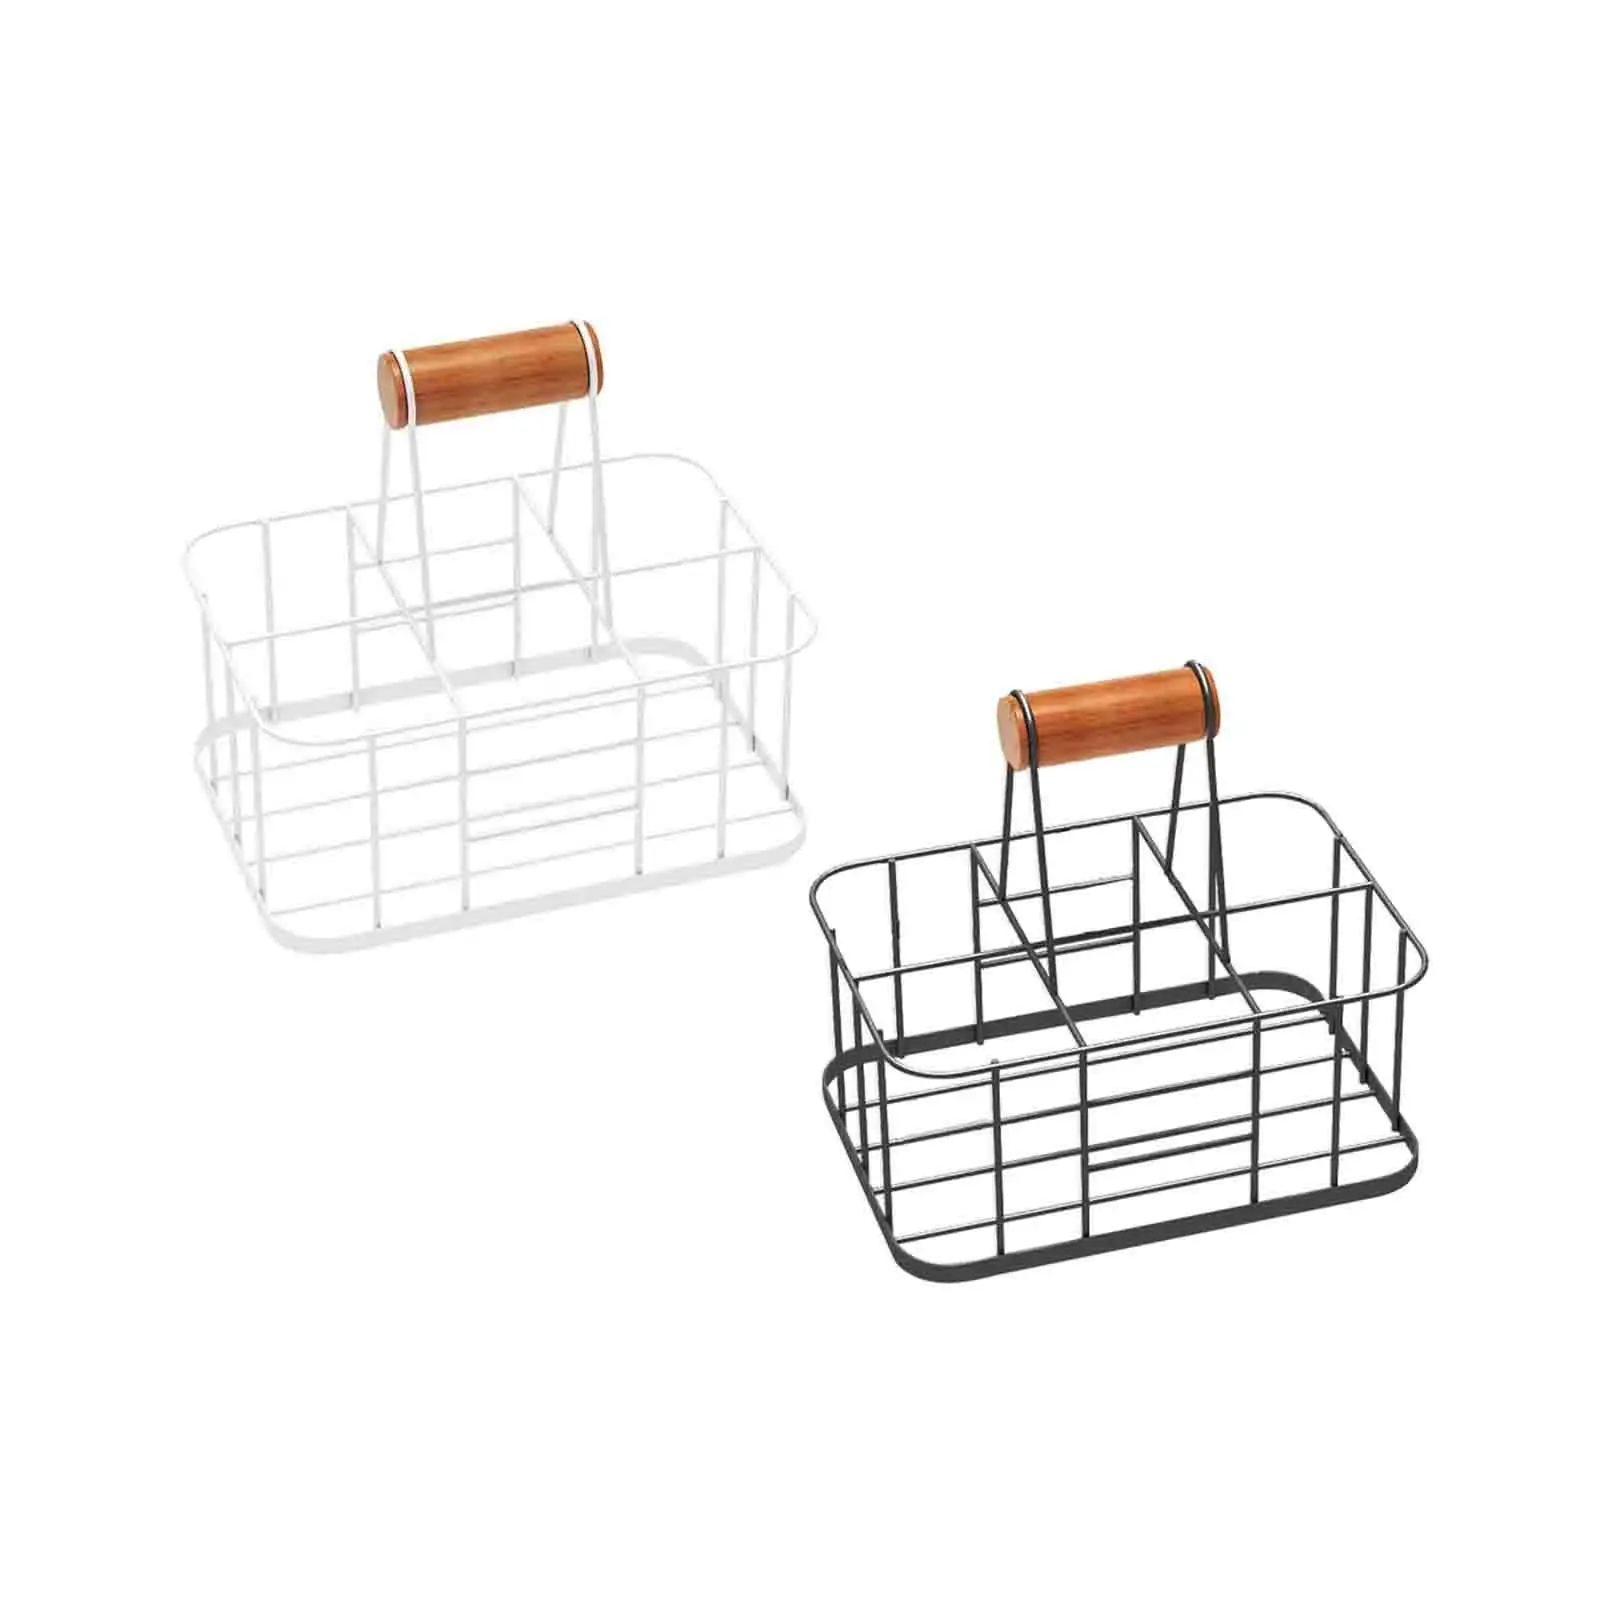 Drink Carrier Attachments Multifunction 6 Grid with Handle Beer Rack Basket Drink Caddy Holder for Camping KTV Home Restaurant